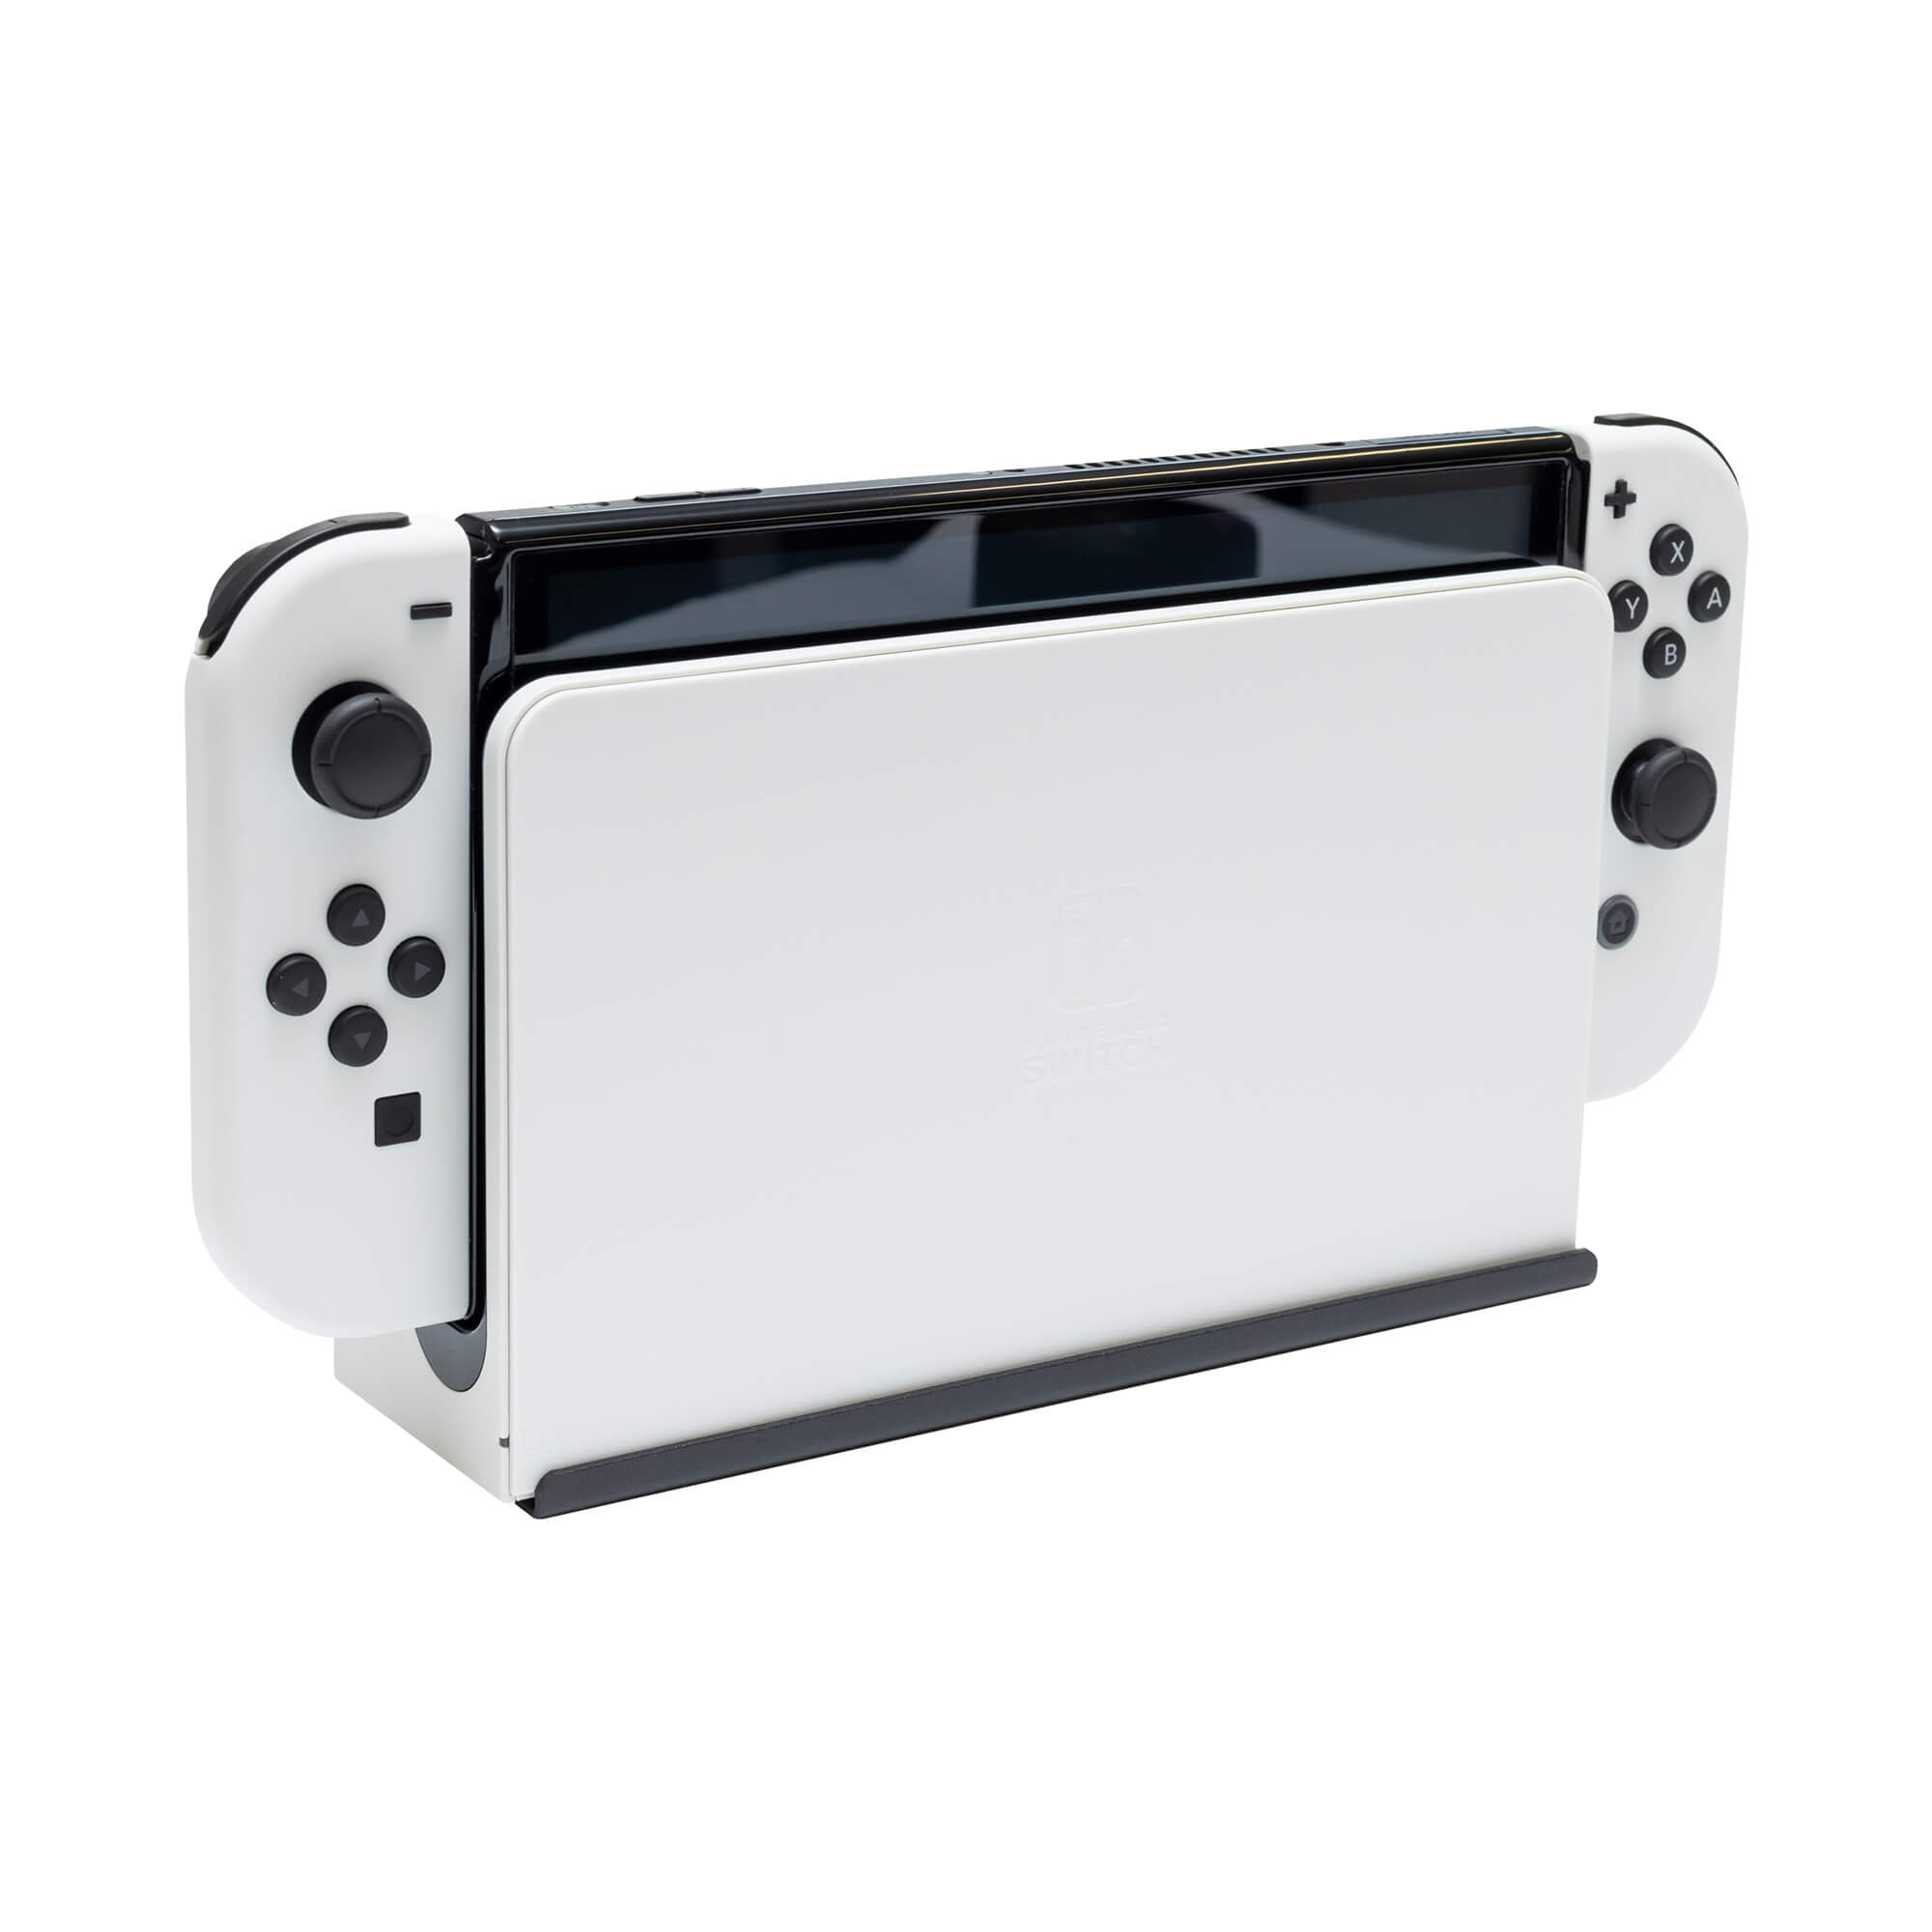 Nintendo Switch OLED system and dock with white Joy-Cons in a HIDEit Switch Mount.